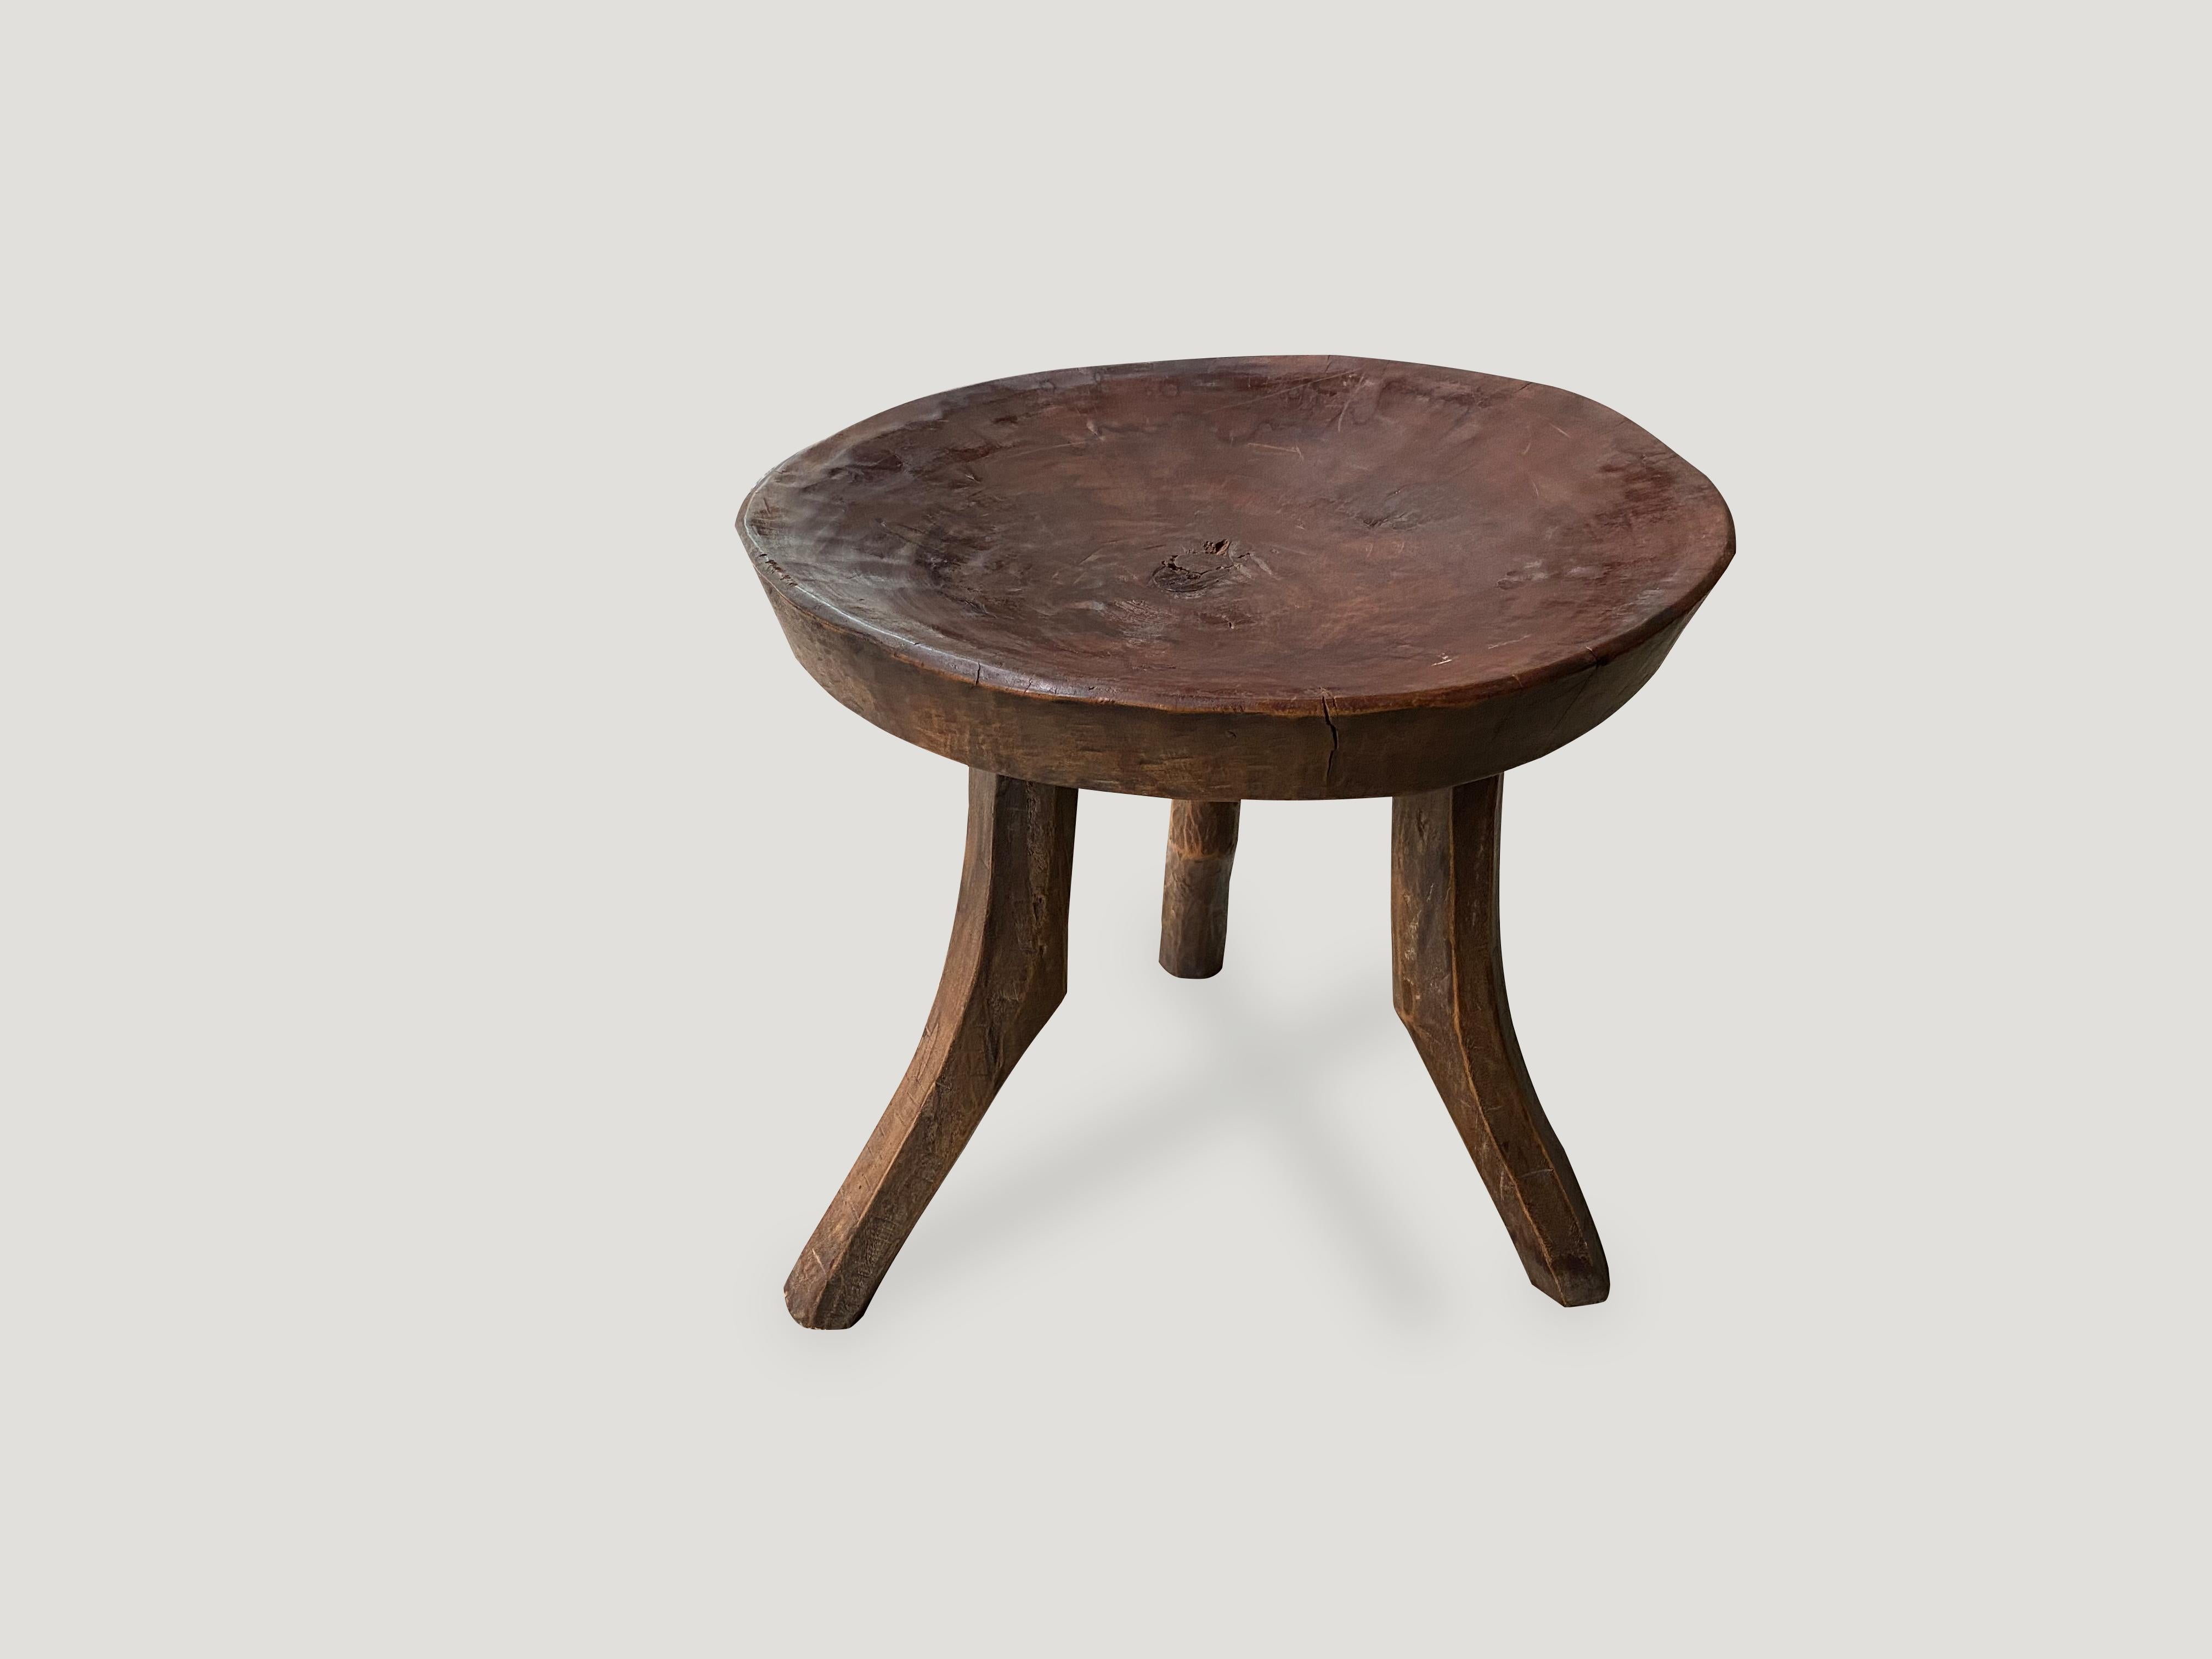 Hand carved sculptural African mahogany stool or side table. Great for placing a book or perhaps towels in a bathroom, magazines etc.

This stool was sourced in the spirit of wabi-sabi, a Japanese philosophy that beauty can be found in